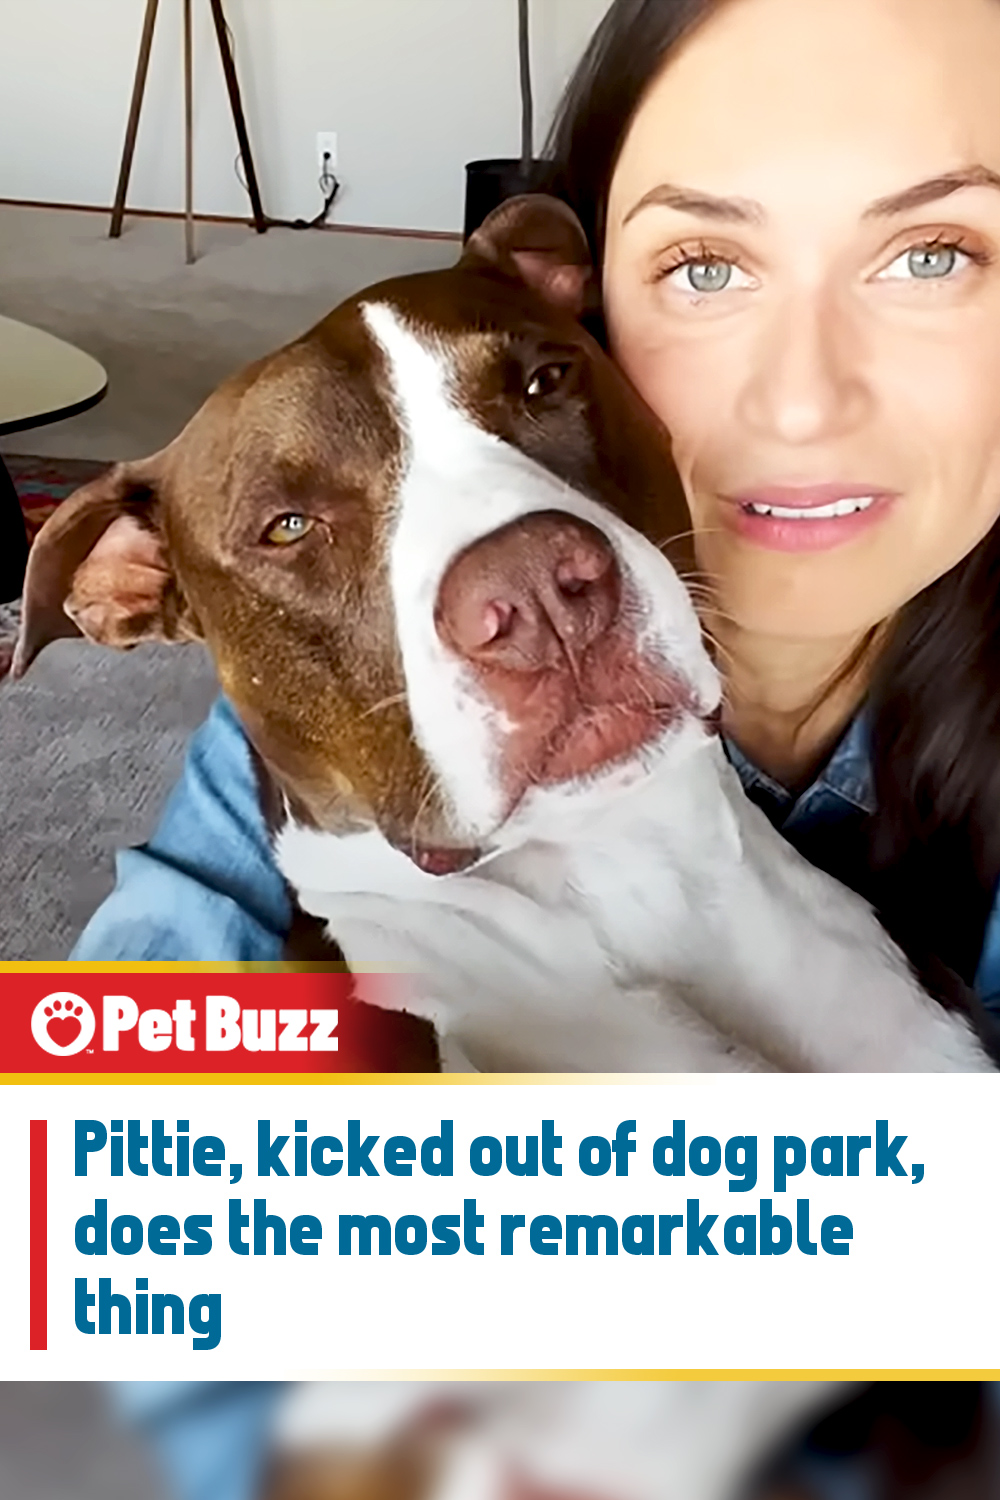 Pittie, kicked out of dog park, does the most remarkable thing